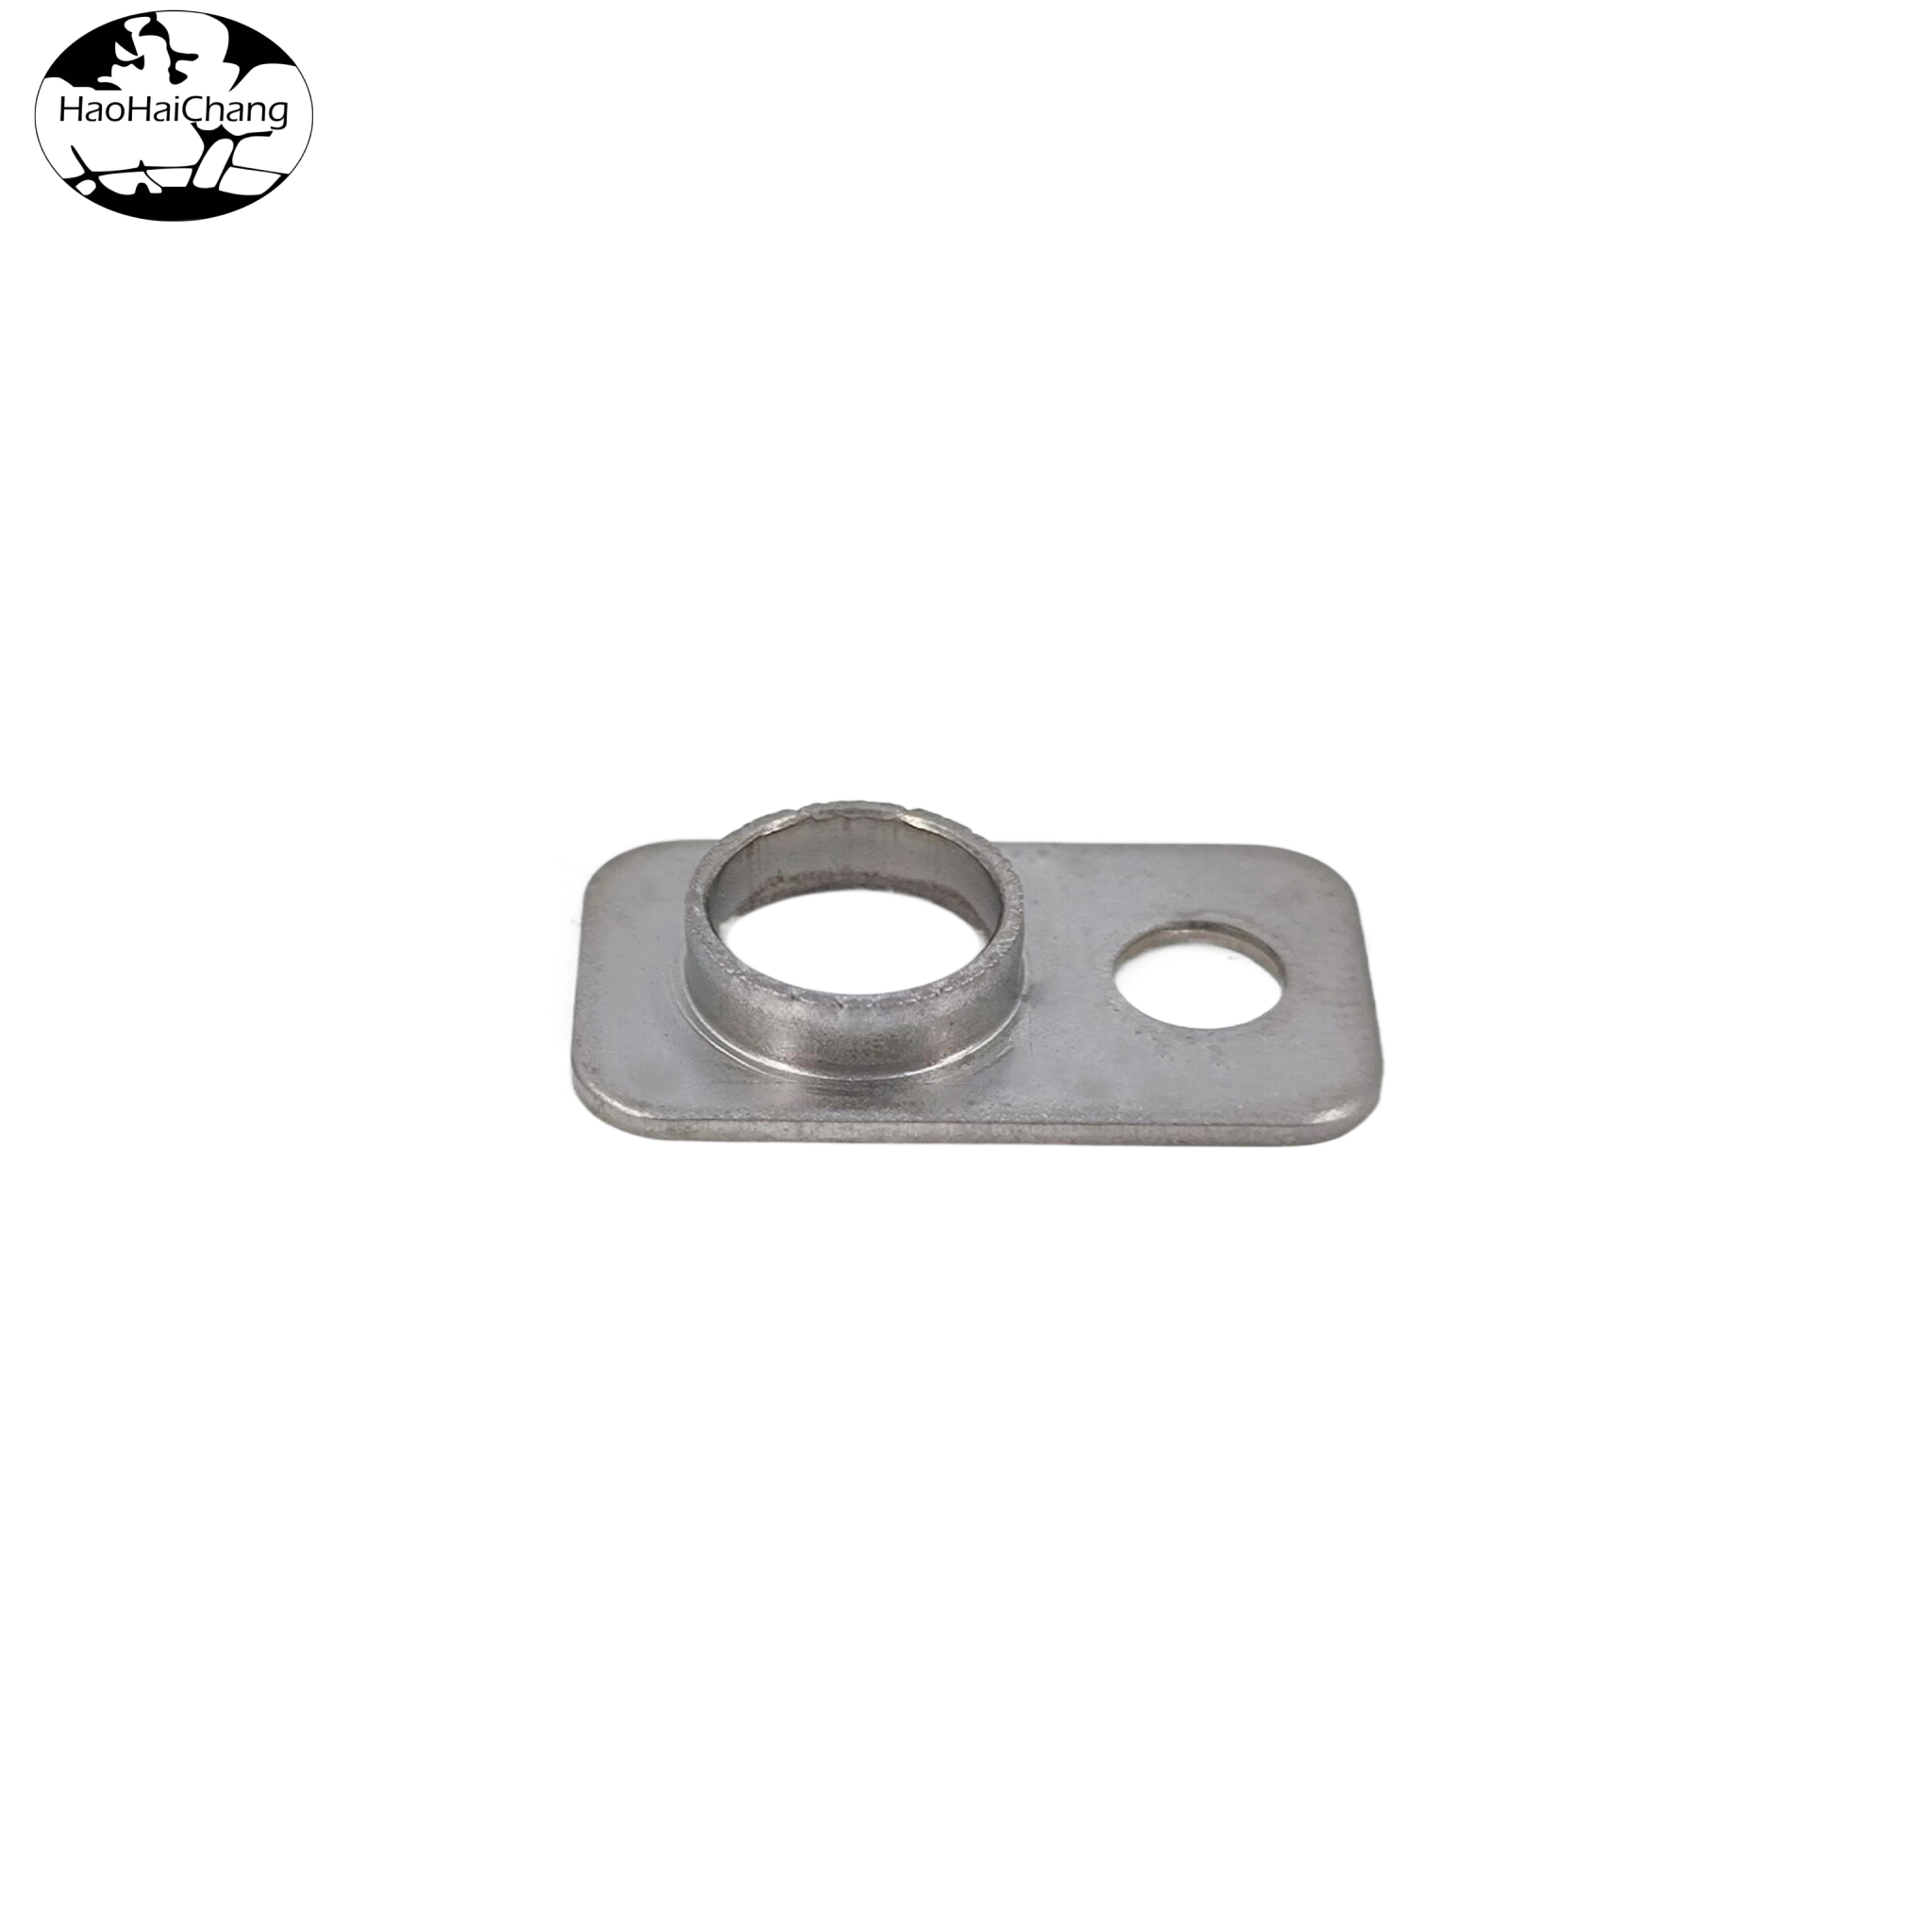 HHC-794 Heating Pipe Fixed Flange